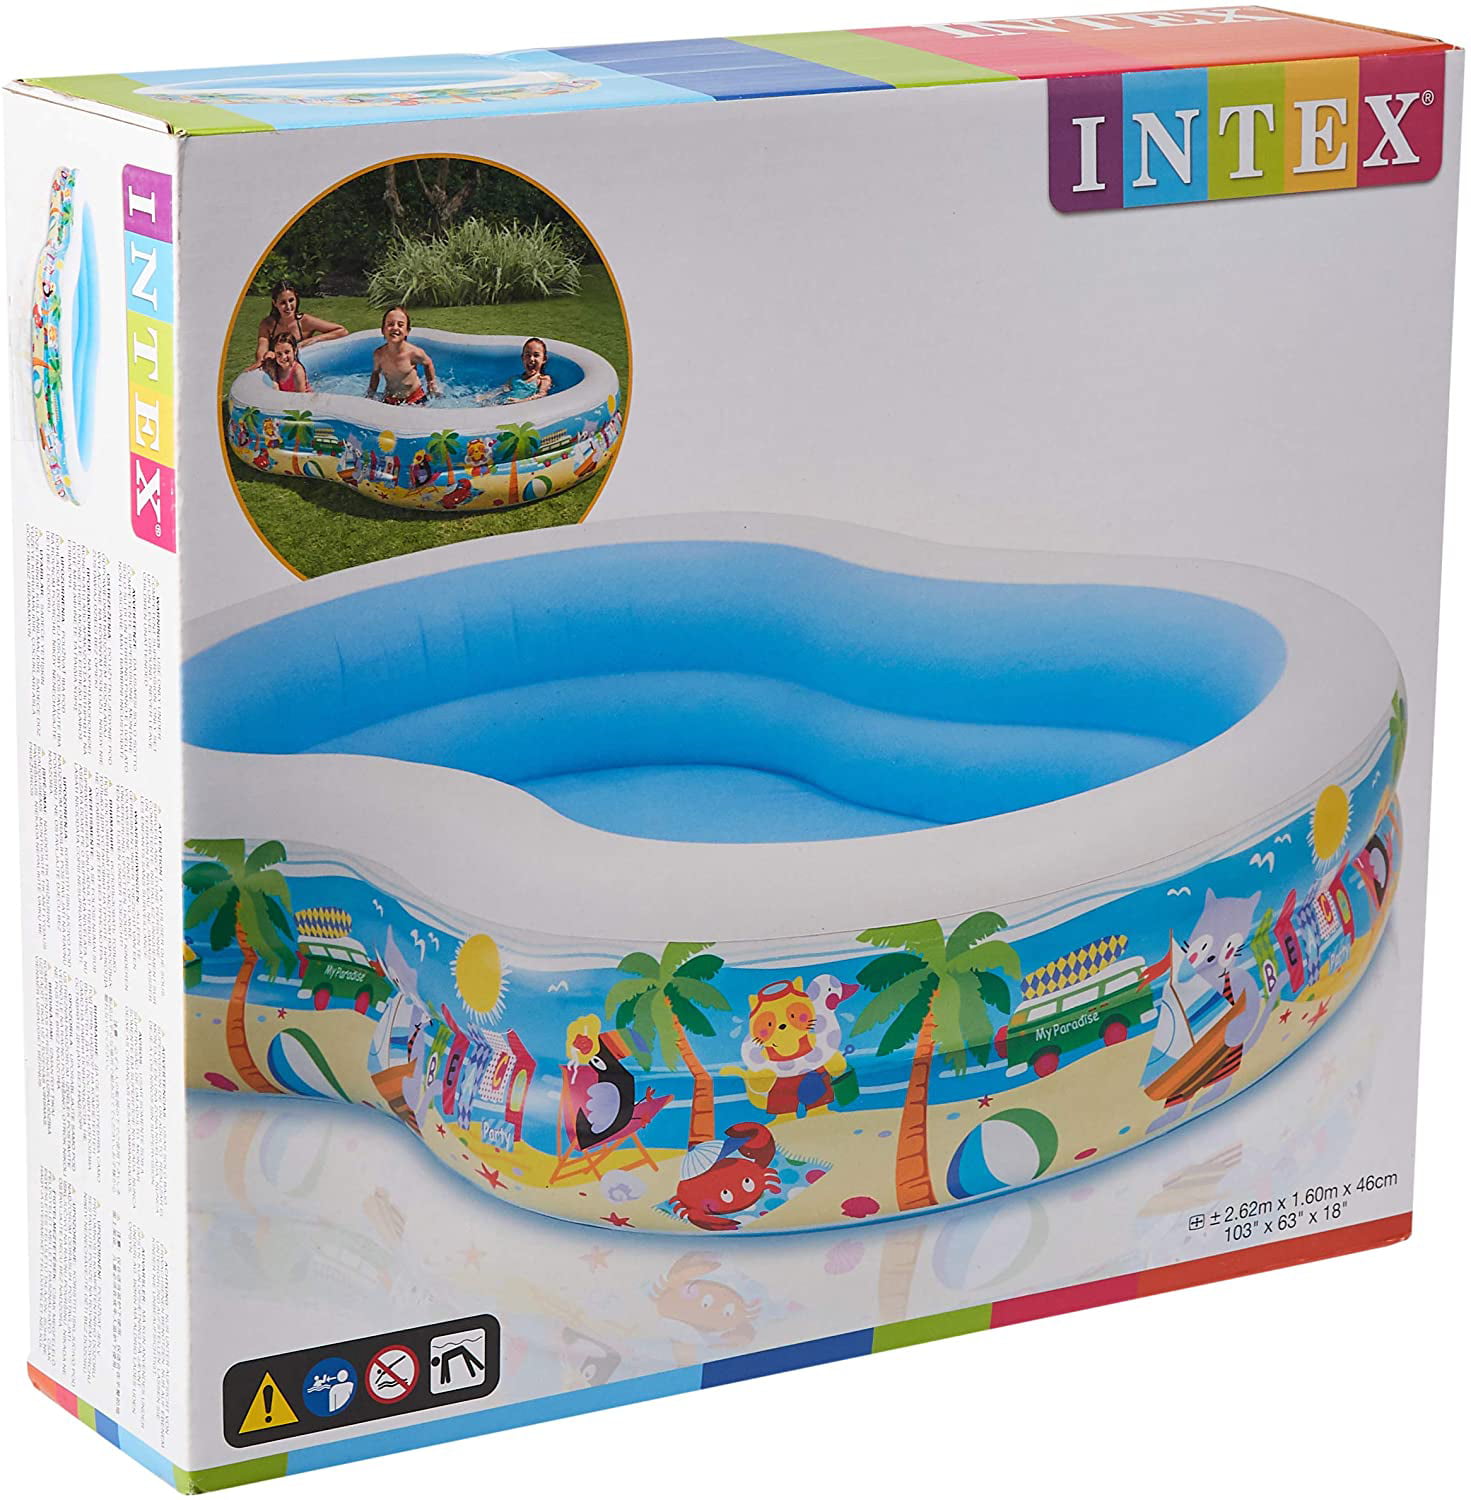 for Ages 3+ 103" X 63" X 18" Intex Swim Center Paradise Inflatable Pool 